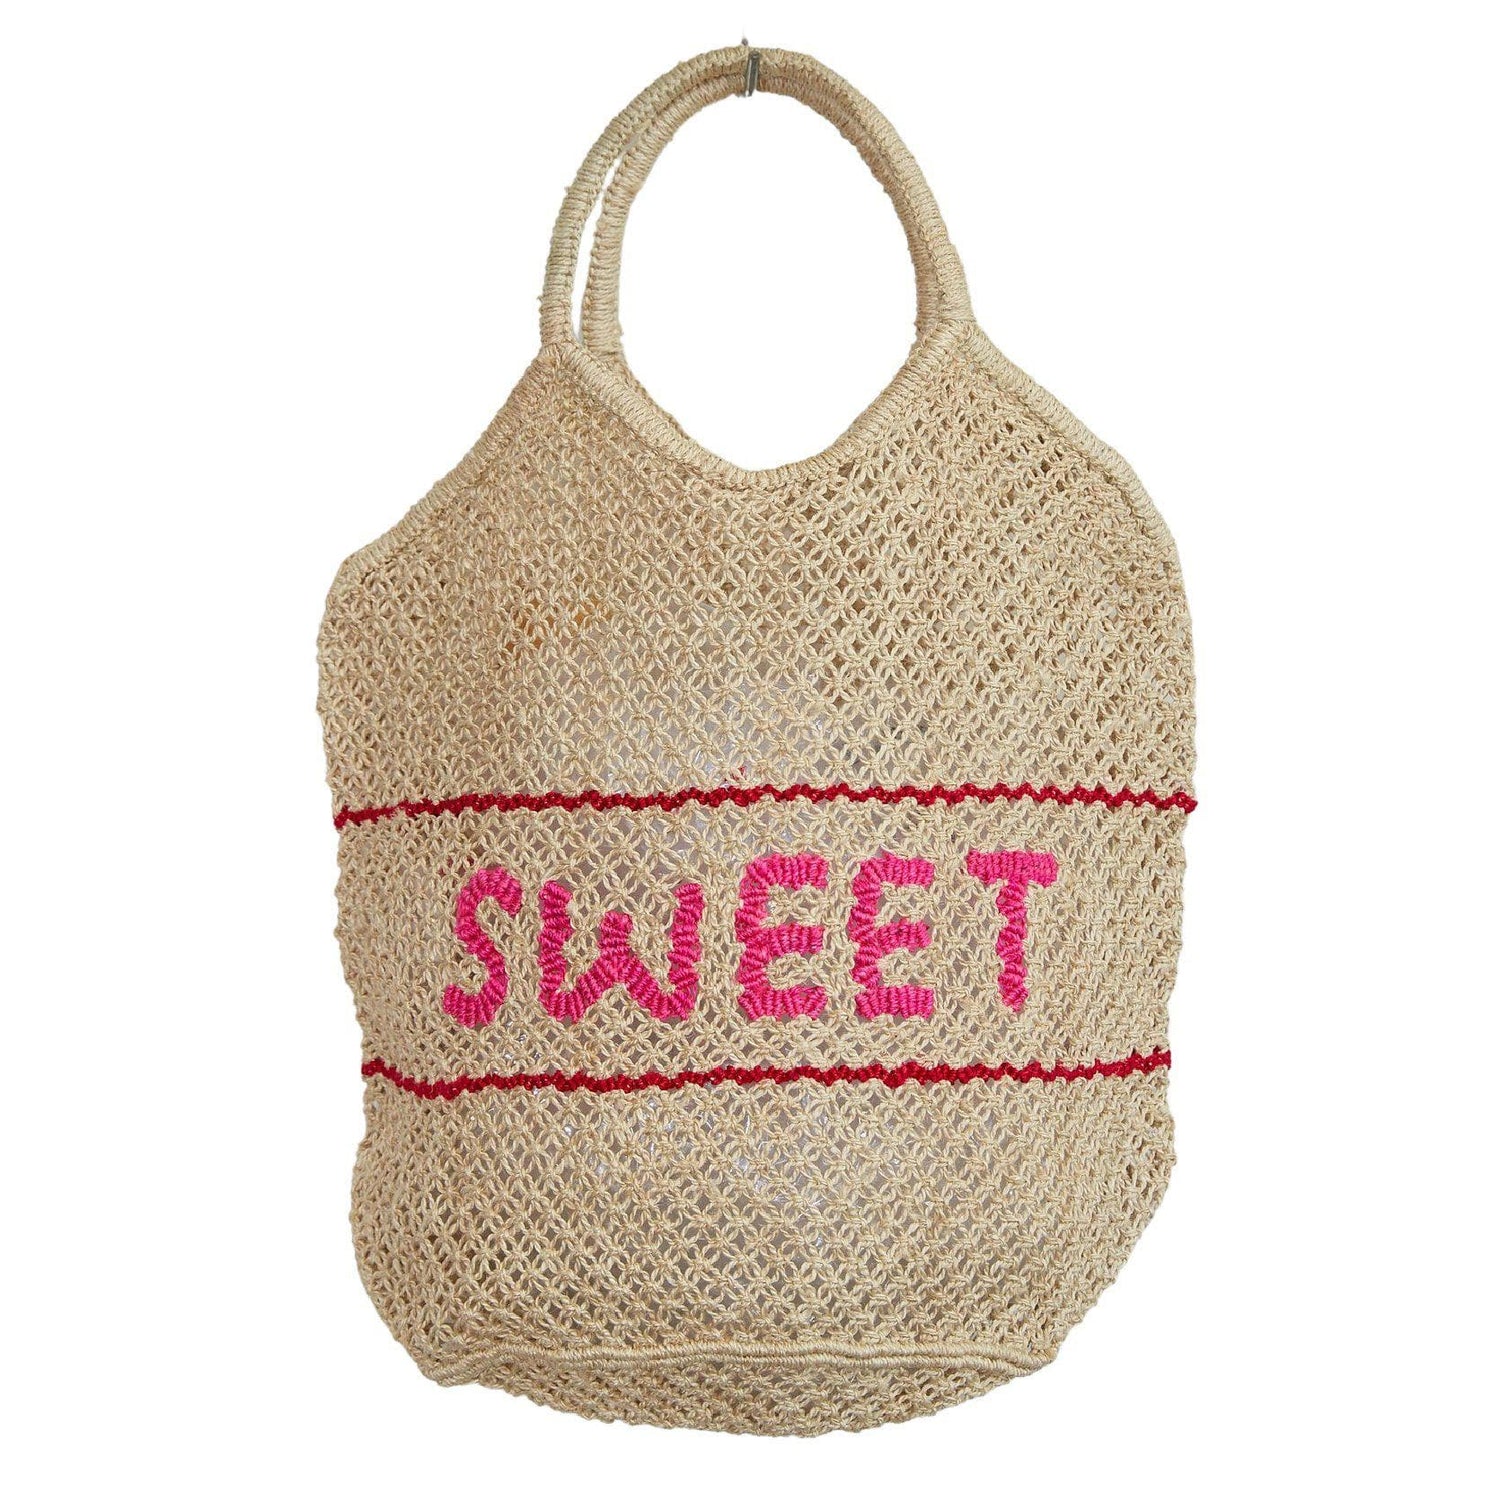 The Jacksons Jute Bag Large in 2023